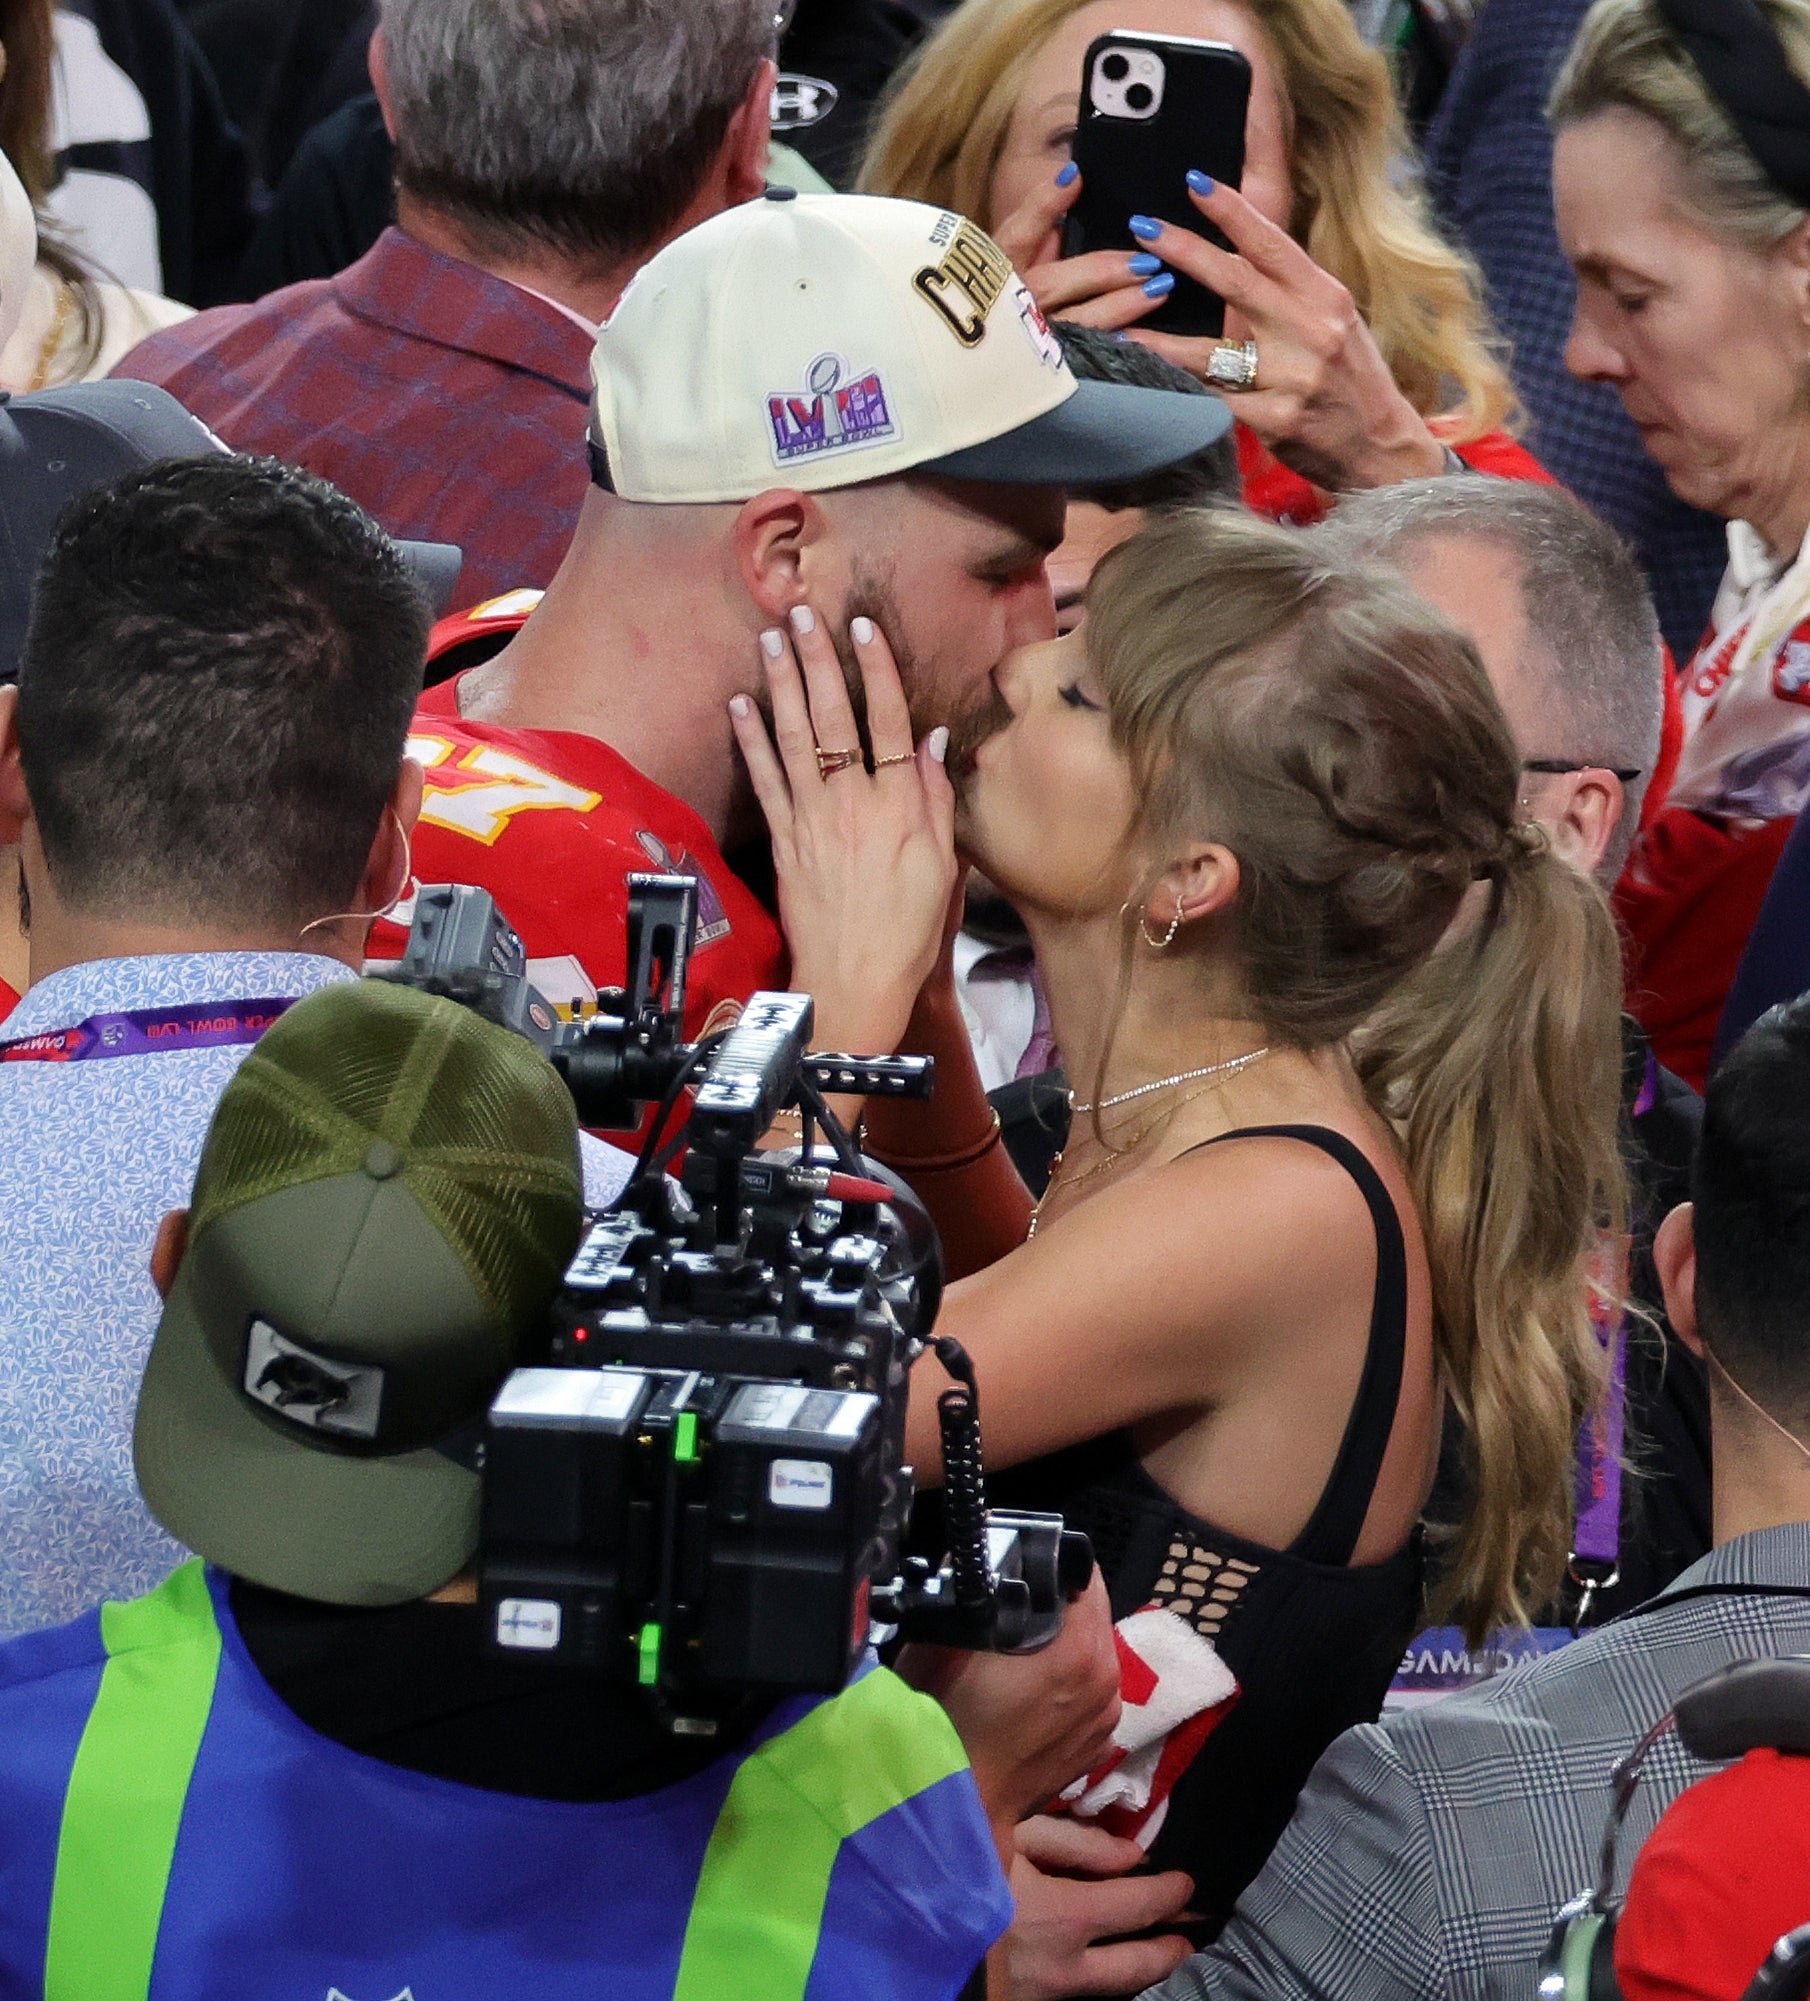 Travis and Taylor kissing after a Chiefs game